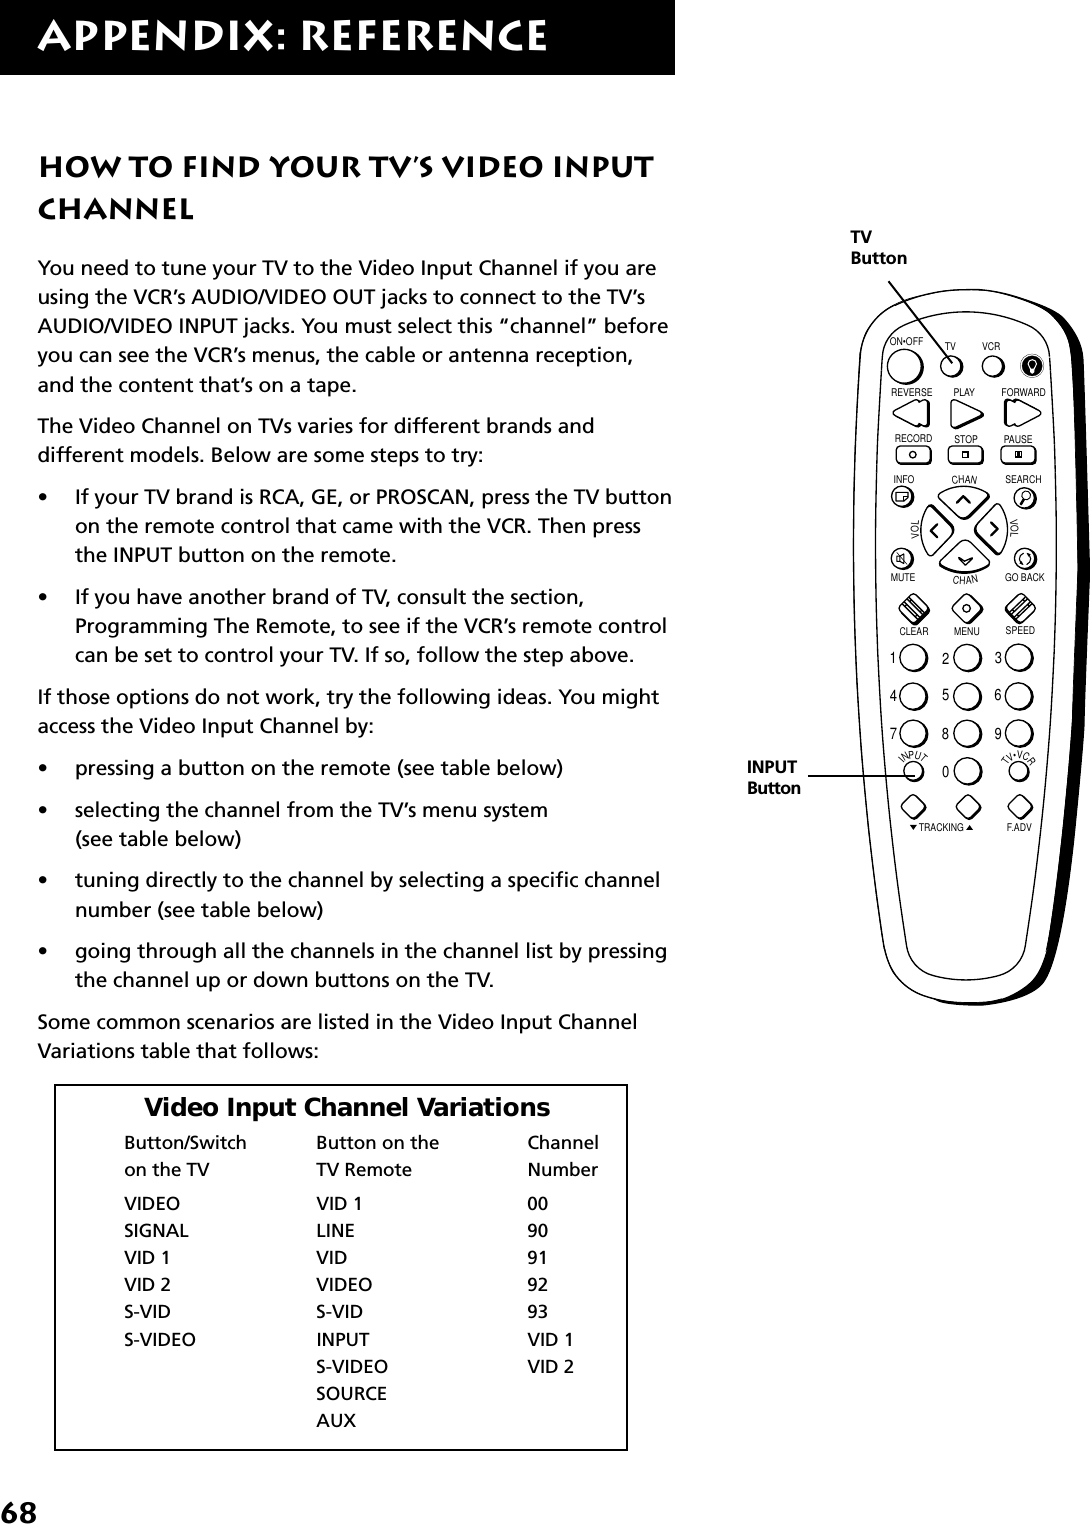 68Appendix: referenceHow to Find Your TV’s Video InputChannelYou need to tune your TV to the Video Input Channel if you areusing the VCR’s AUDIO/VIDEO OUT jacks to connect to the TV’sAUDIO/VIDEO INPUT jacks. You must select this “channel” beforeyou can see the VCR’s menus, the cable or antenna reception,and the content that’s on a tape.The Video Channel on TVs varies for different brands anddifferent models. Below are some steps to try:•If your TV brand is RCA, GE, or PROSCAN, press the TV buttonon the remote control that came with the VCR. Then pressthe INPUT button on the remote.•If you have another brand of TV, consult the section,Programming The Remote, to see if the VCR’s remote controlcan be set to control your TV. If so, follow the step above.If those options do not work, try the following ideas. You mightaccess the Video Input Channel by:•pressing a button on the remote (see table below)•selecting the channel from the TV’s menu system(see table below)•tuning directly to the channel by selecting a specific channelnumber (see table below)•going through all the channels in the channel list by pressingthe channel up or down buttons on the TV.Some common scenarios are listed in the Video Input ChannelVariations table that follows:Video Input Channel VariationsButton/Switch Button on the Channelon the TV TV Remote NumberVIDEO VID 1 00SIGNAL LINE 90VID 1 VID 91VID 2 VIDEO 92S-VID S-VID 93S-VIDEO INPUT VID 1S-VIDEO VID 2SOURCEAUXINPUTTV•VCRON•OFFPLAY FORWARDRECORD STOP PAUSEF.ADVCLEAR MENU SPEEDTRACKING1472583690CHANVOLVOLCHANINFO SEARCHMUTE GO BACK TV VCRREVERSETVButtonINPUTButton